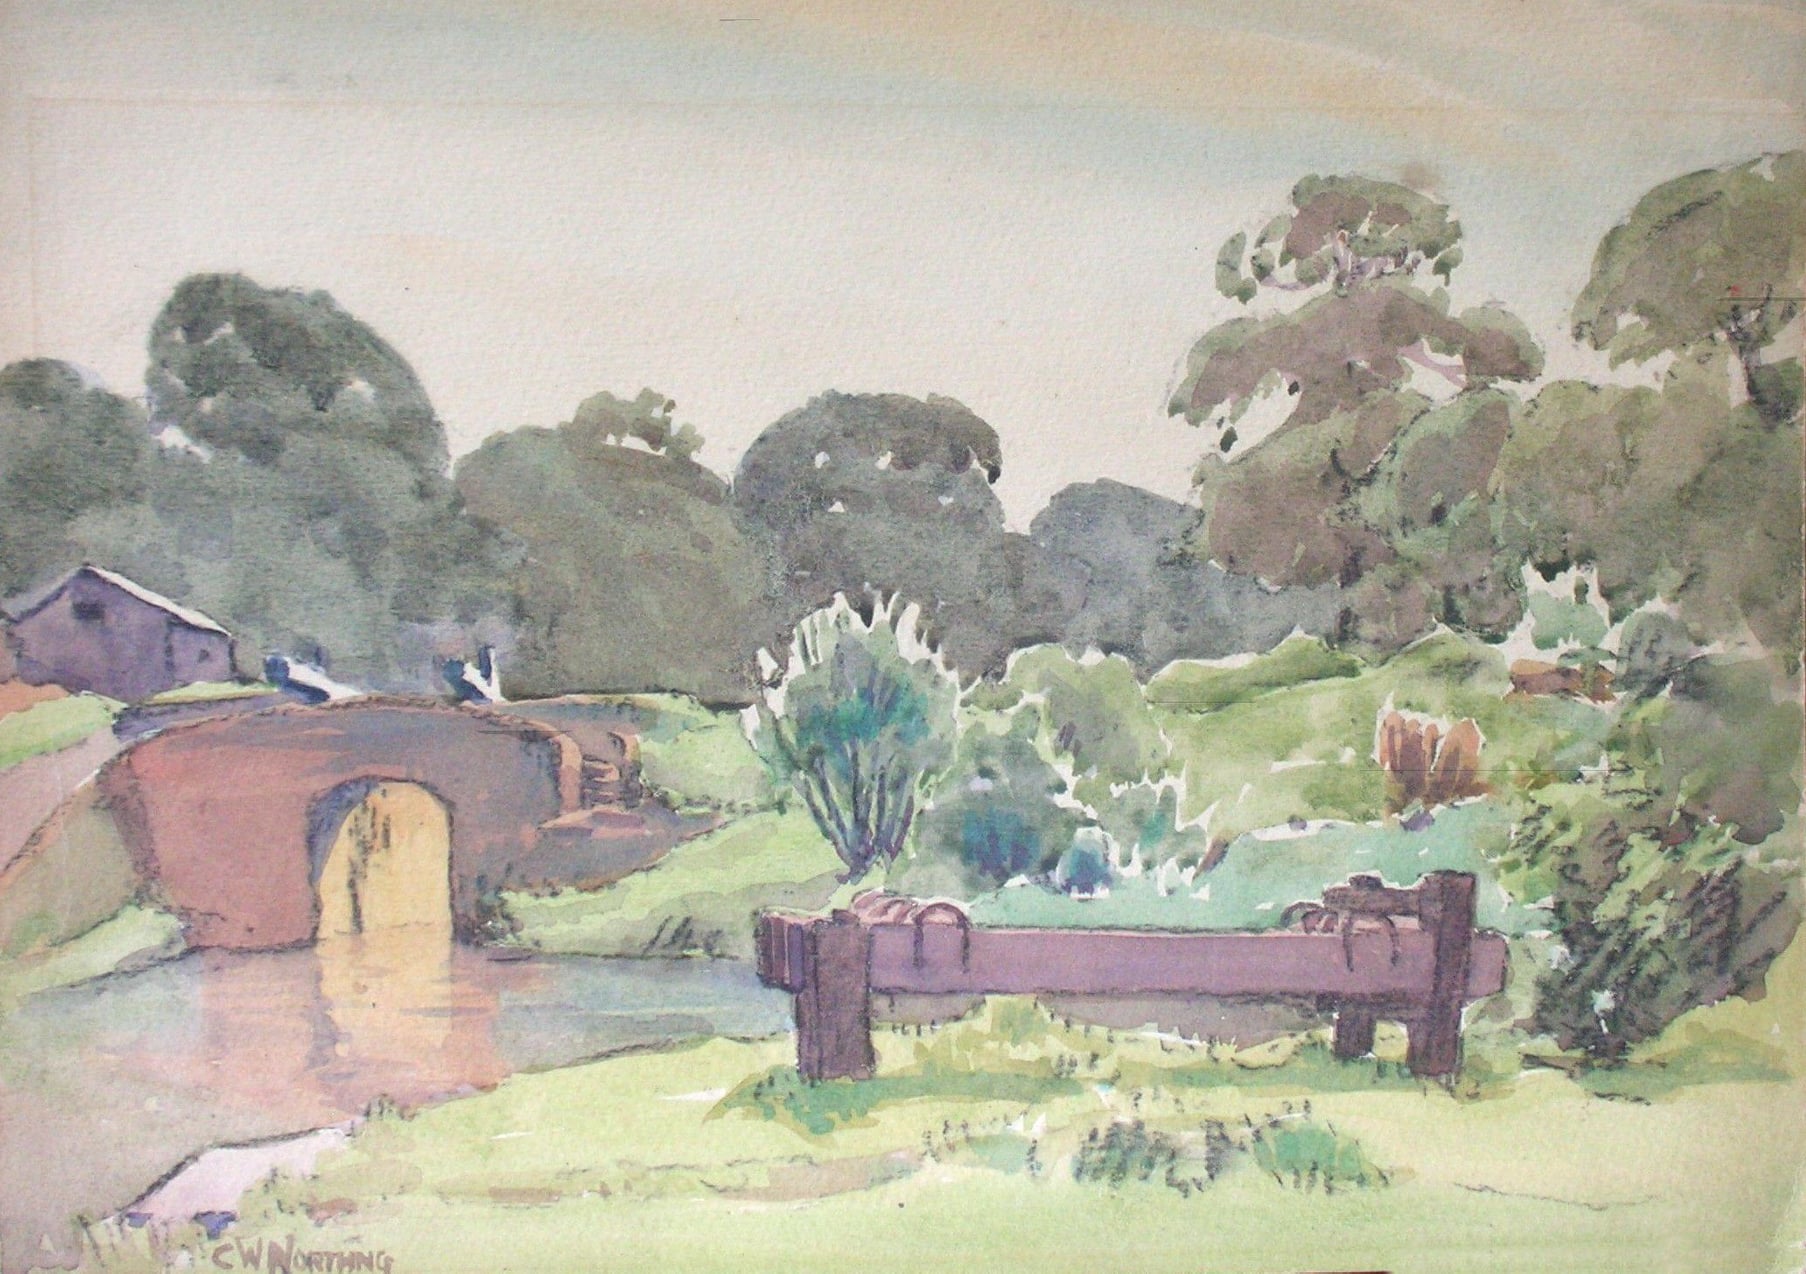 Watercolour by Clarence W Northing in 1938 with permission of grandson Christopher Wainwright